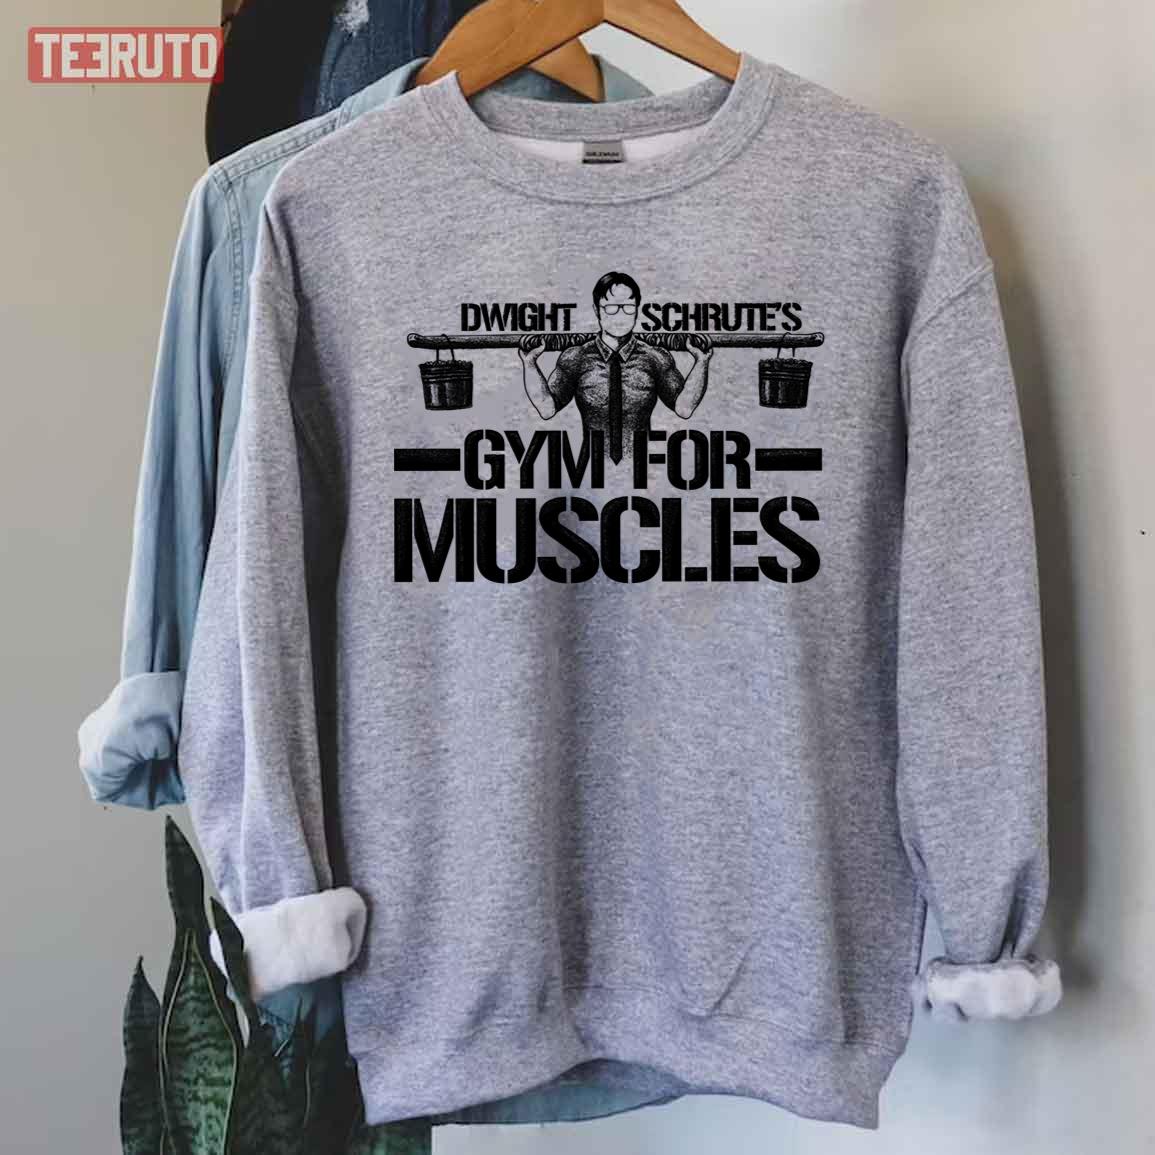 Gym And Fitness Dwight Schrute’s Muscles Unisex Sweatshirt